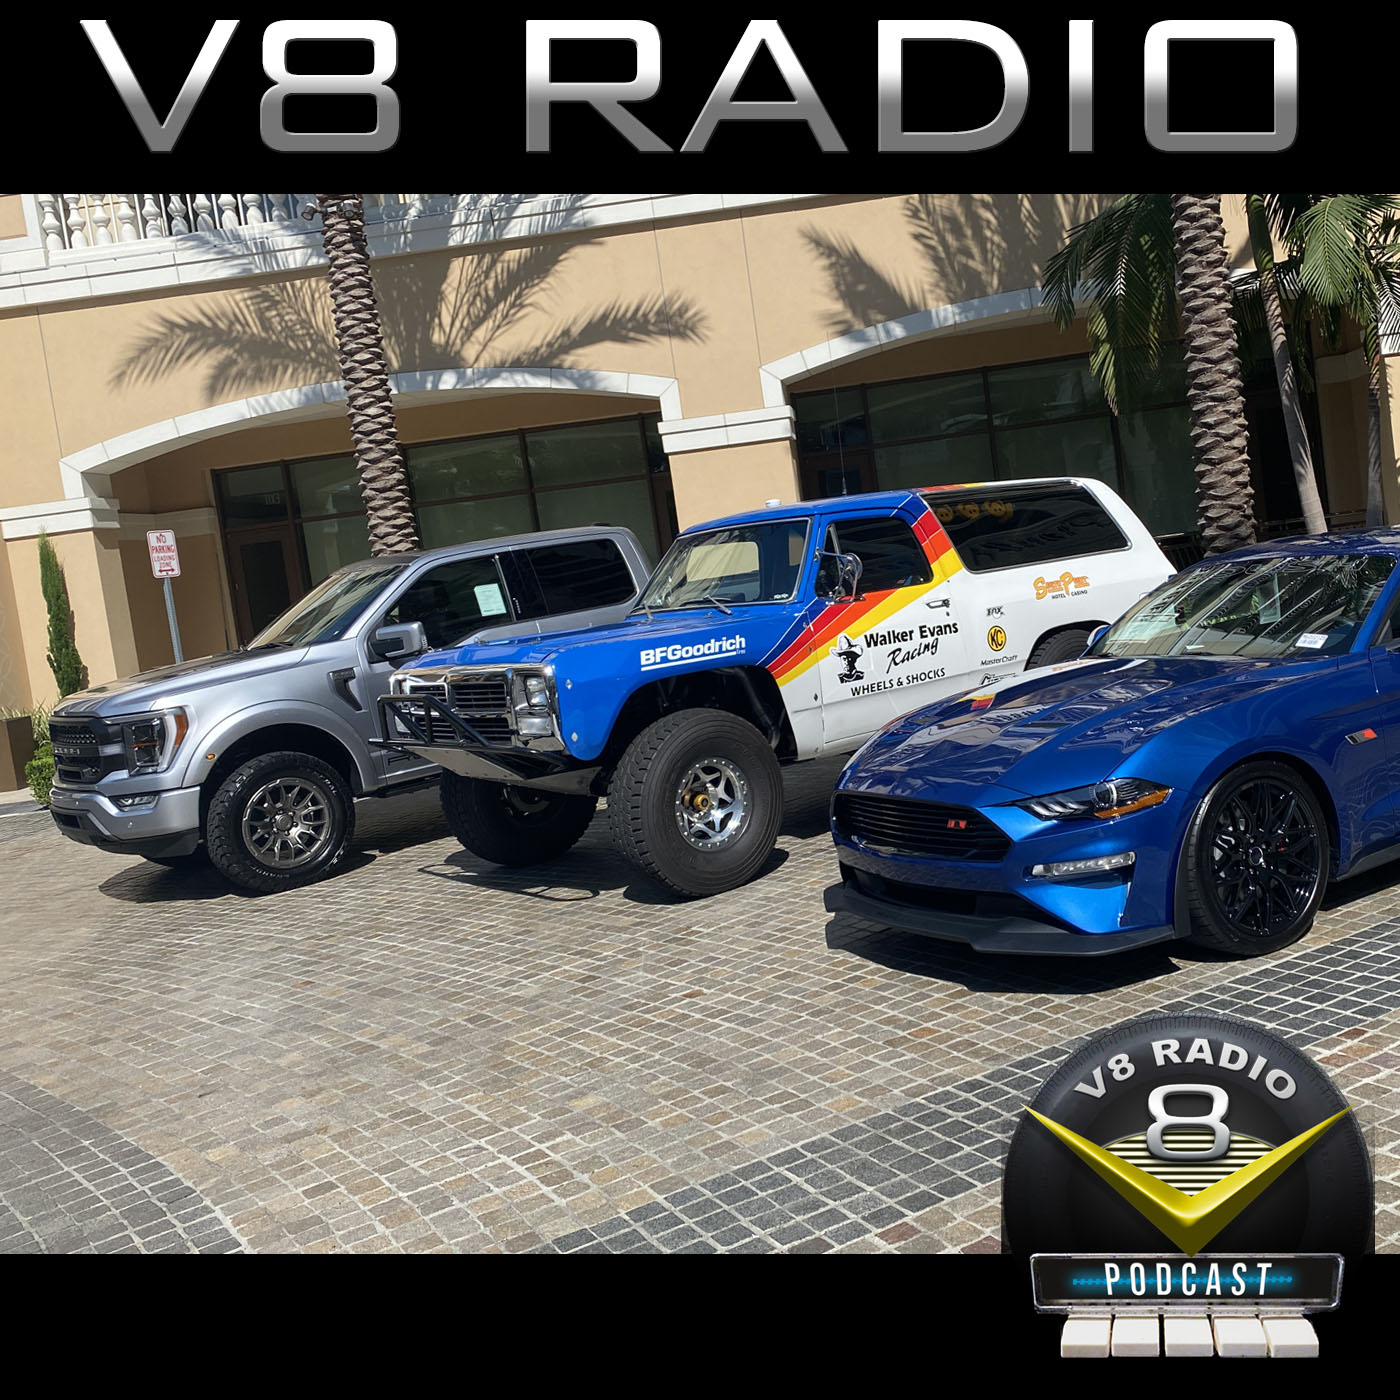 SEMA Hall Of Fame, Bonneville Speed Week, Hanging in SoCal, Automotive Trivia, and More on the V8 Radio Podcast!